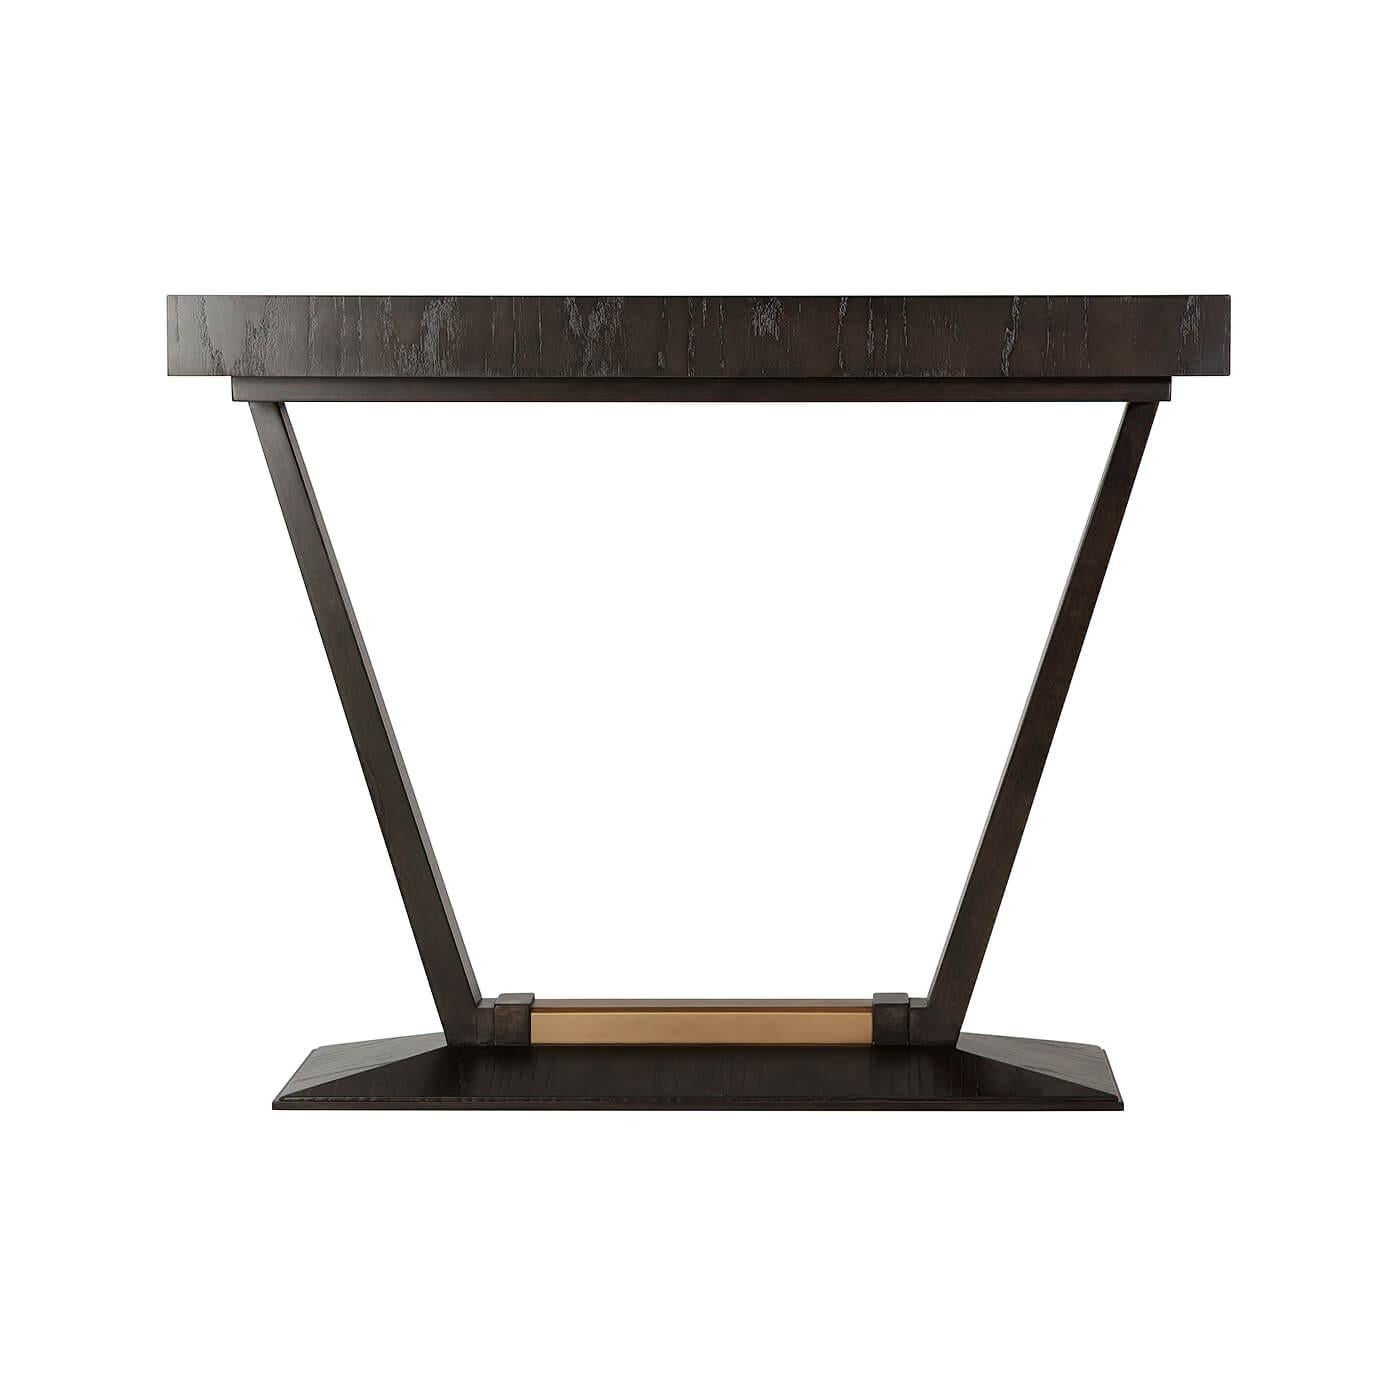 A French Art Deco style rectangular ash veneer top console table with a beveled base with a bronze finish accents and supported by angled tapered legs.

Dimensions: 39.75